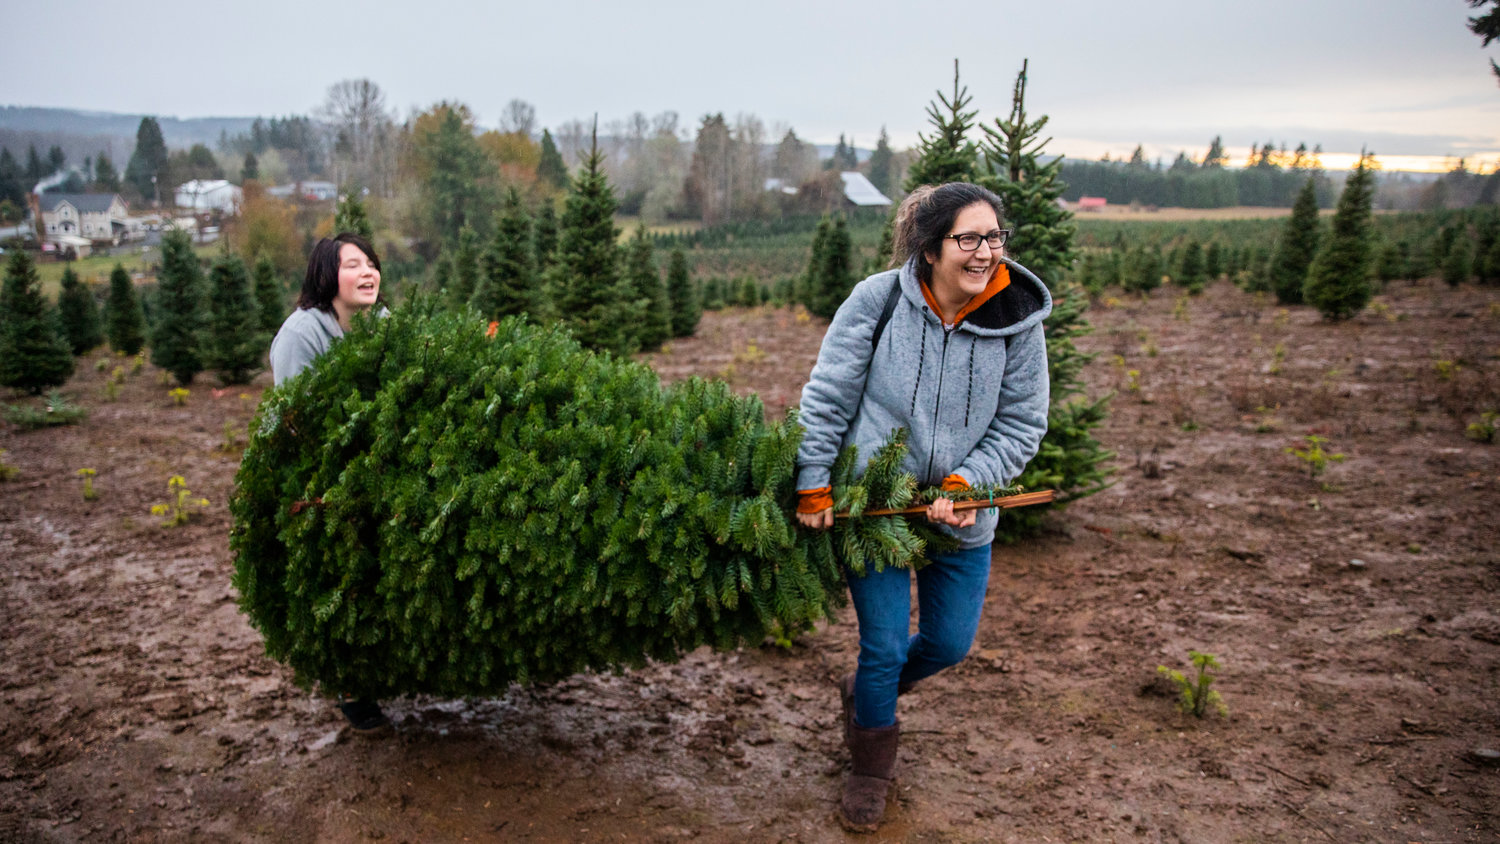 Winona Gladue smiles while carrying a Christmas tree with her daughter Lily, 13, through mud at the Mistletoe Tree Farm west of Chehalis on Friday.